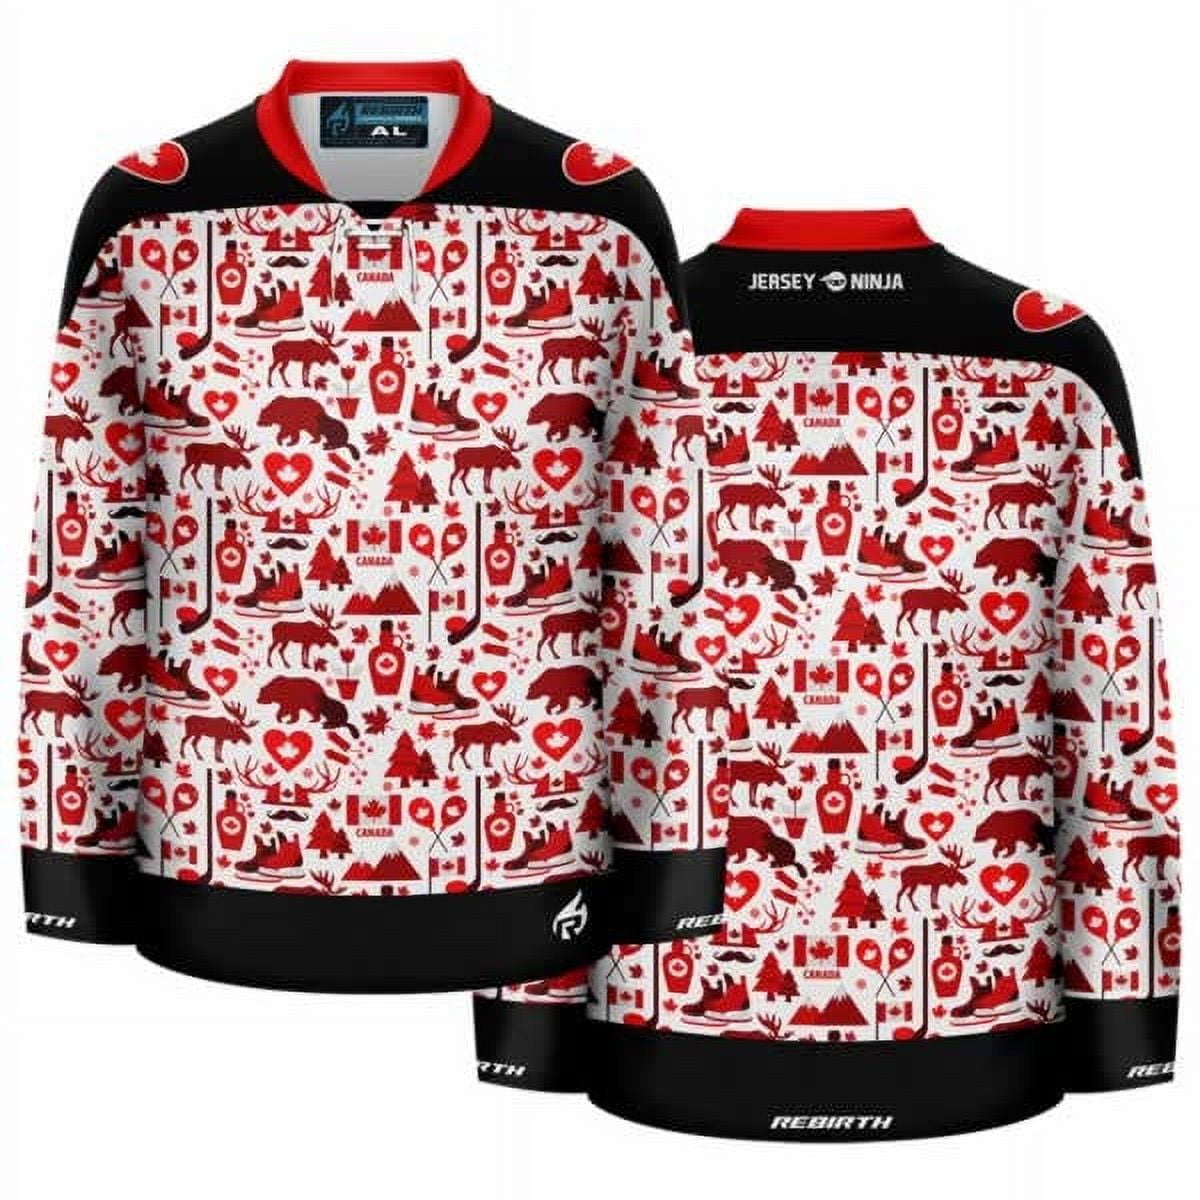 canada day jersey